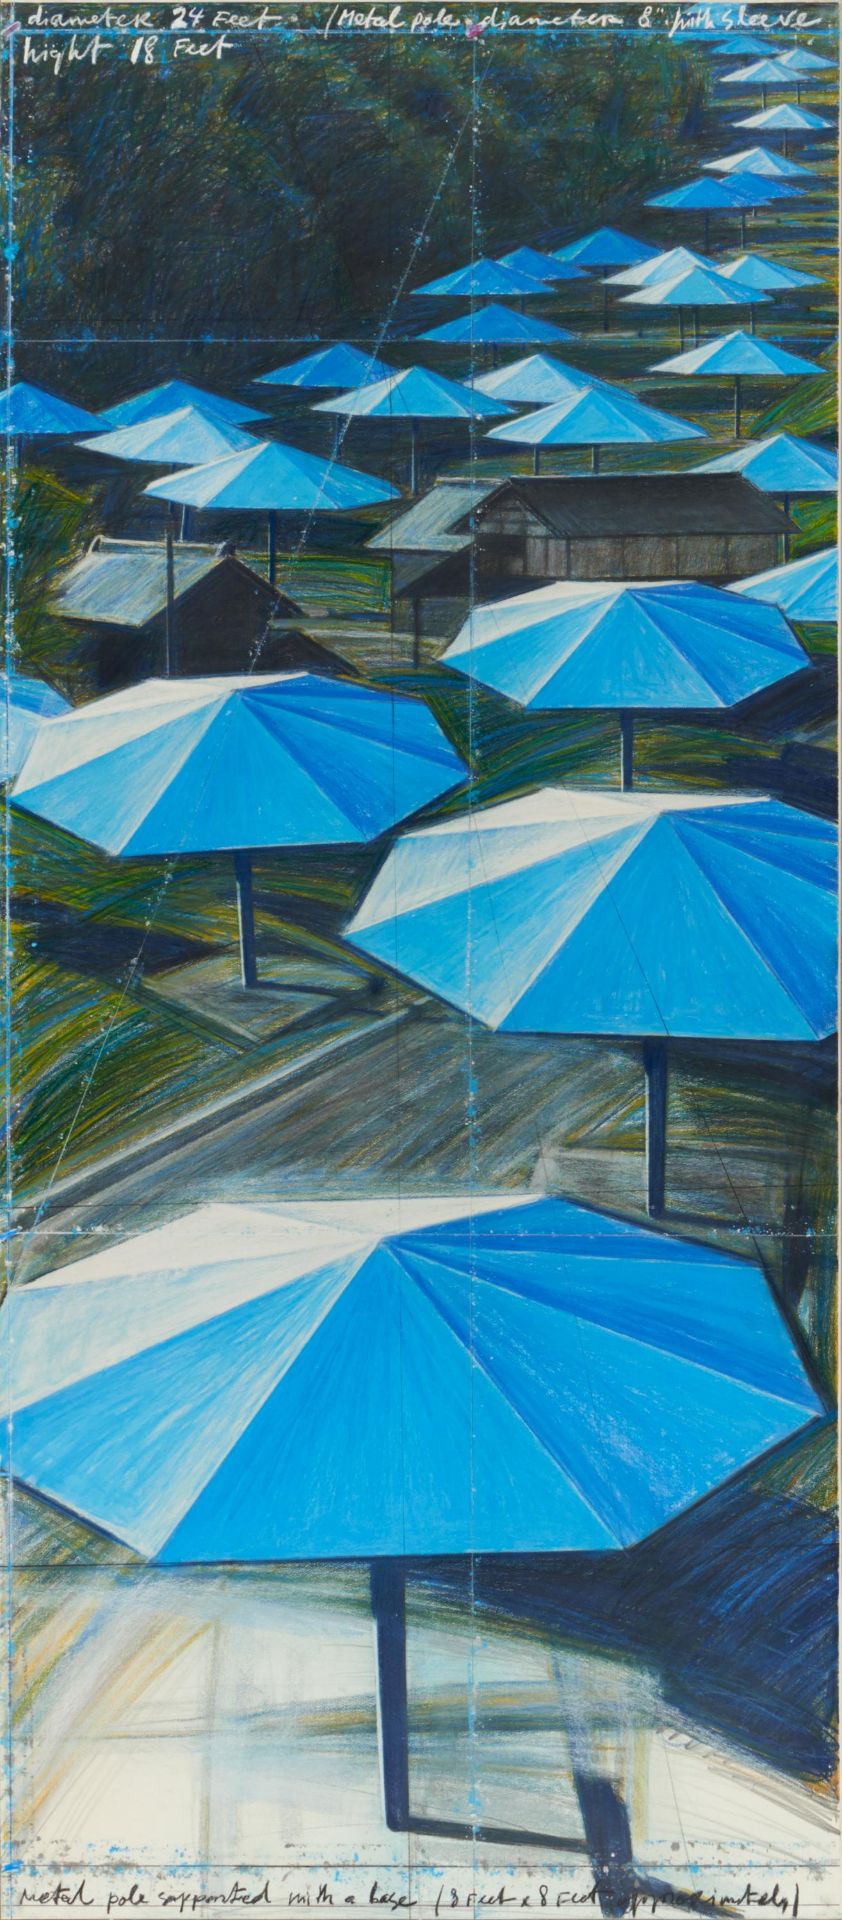 Christo: The Umbrellas (Joint Project for Japan and USA) - Image 5 of 8